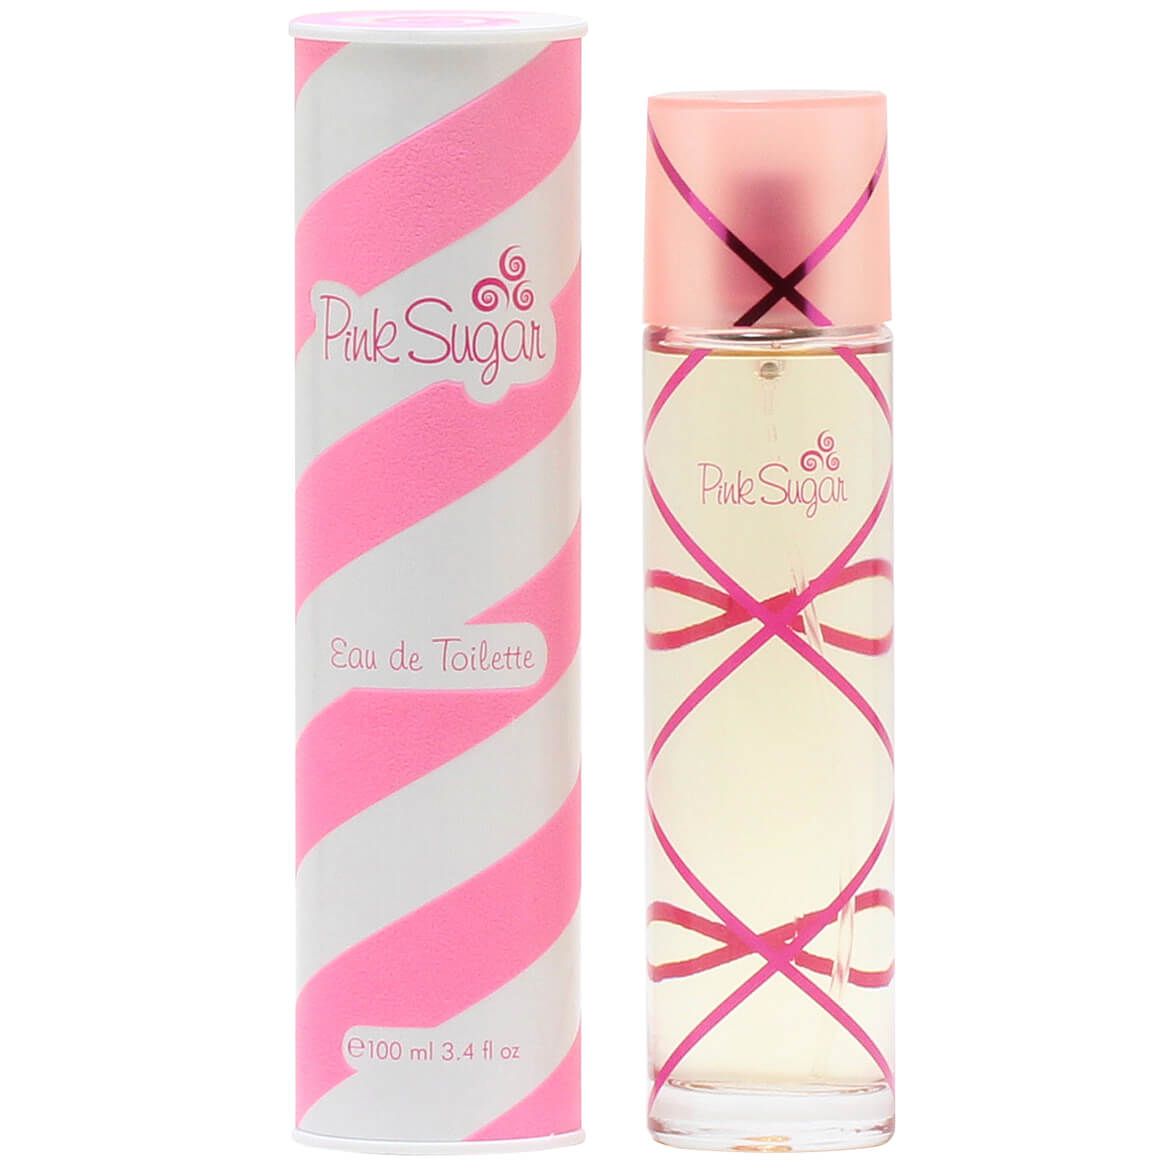 Pink Sugar by Aquolina for Women EDT, 3.4 oz. + '-' + 373065